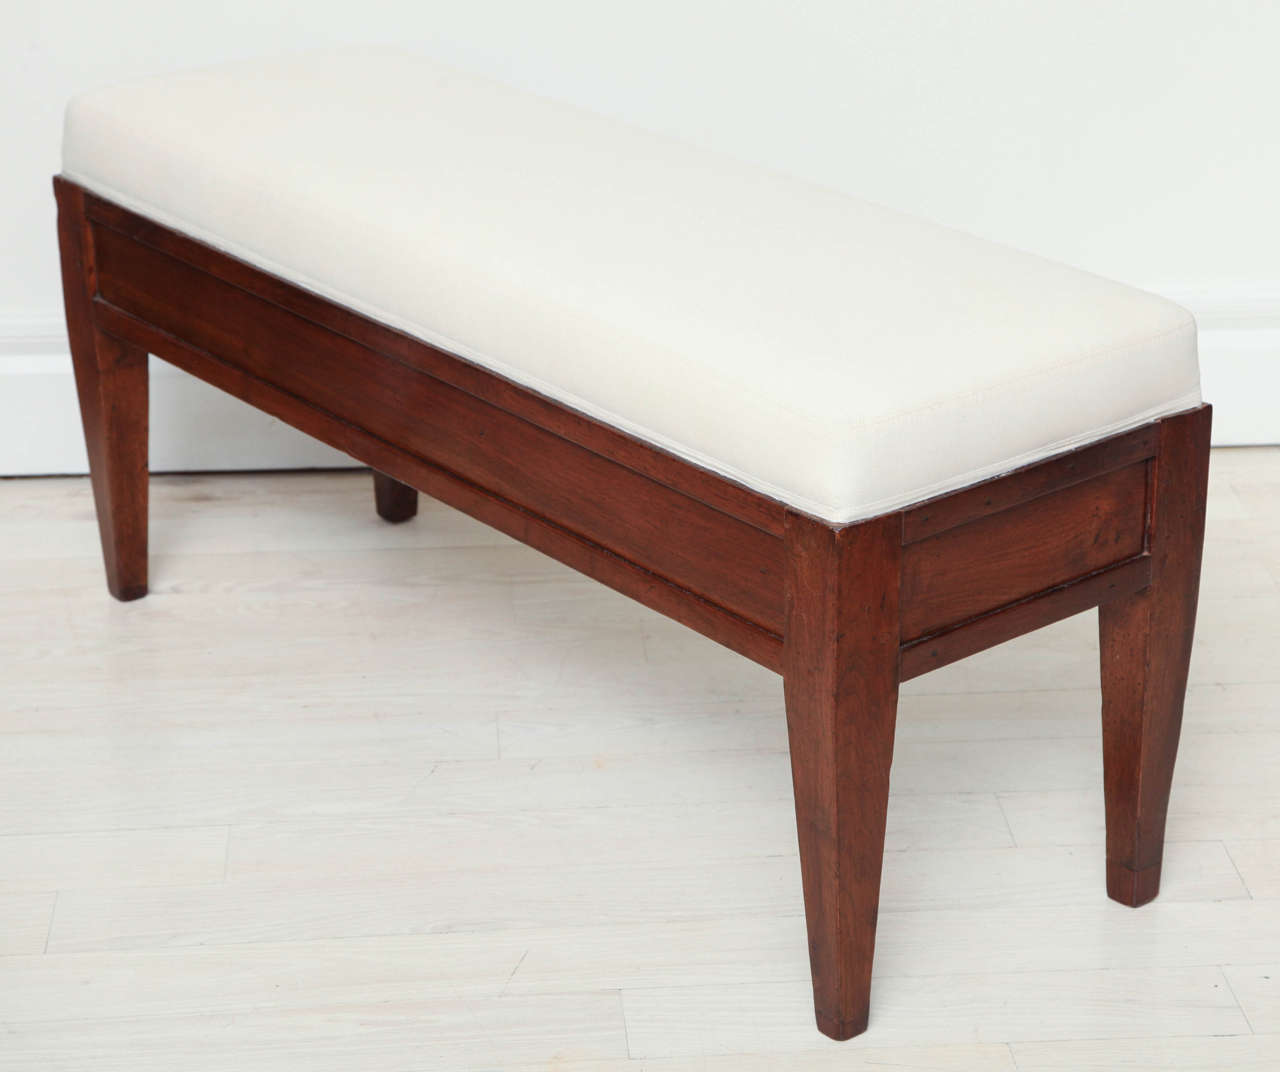 Pair of walnut hall benches, each with paneled front and sides on square tapered legs